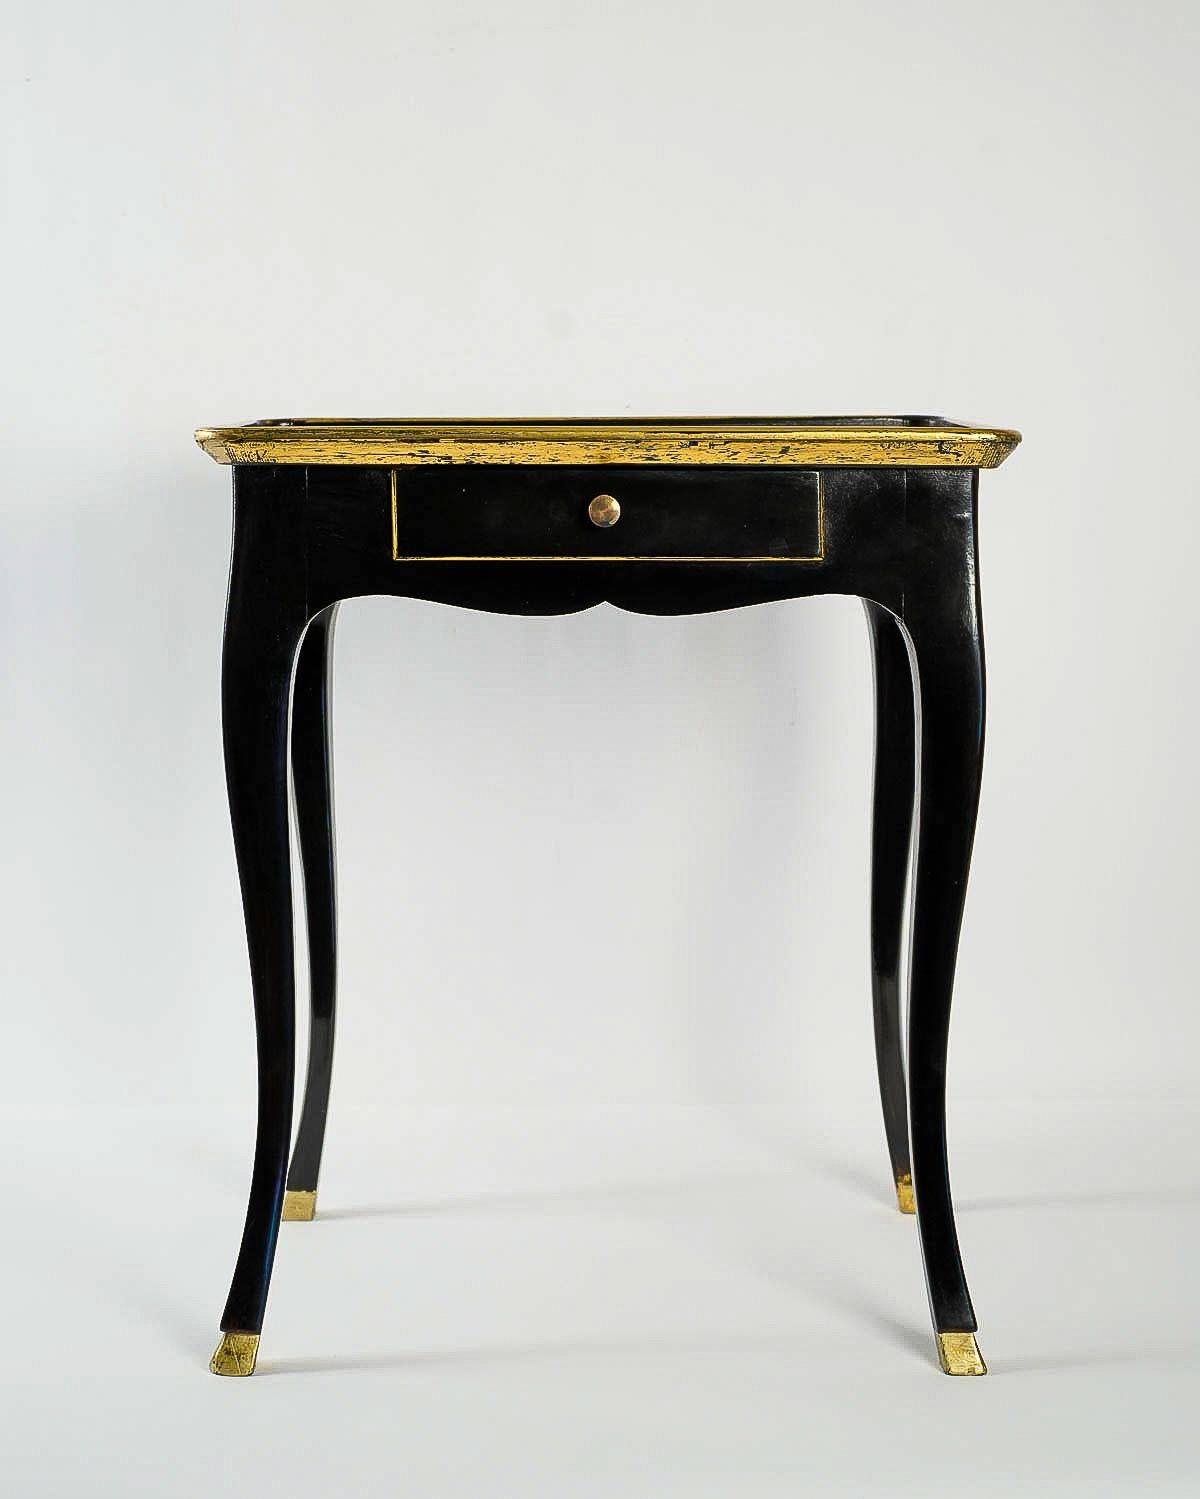 We are pleased to present you, an elegant and decorative black lacquered walnut and picked out gold Cabaret table. Our cabaret table raised on serpentine legs. One drawer. On the top a lovely red leather.

Beautiful French Louis XV period Cabaret